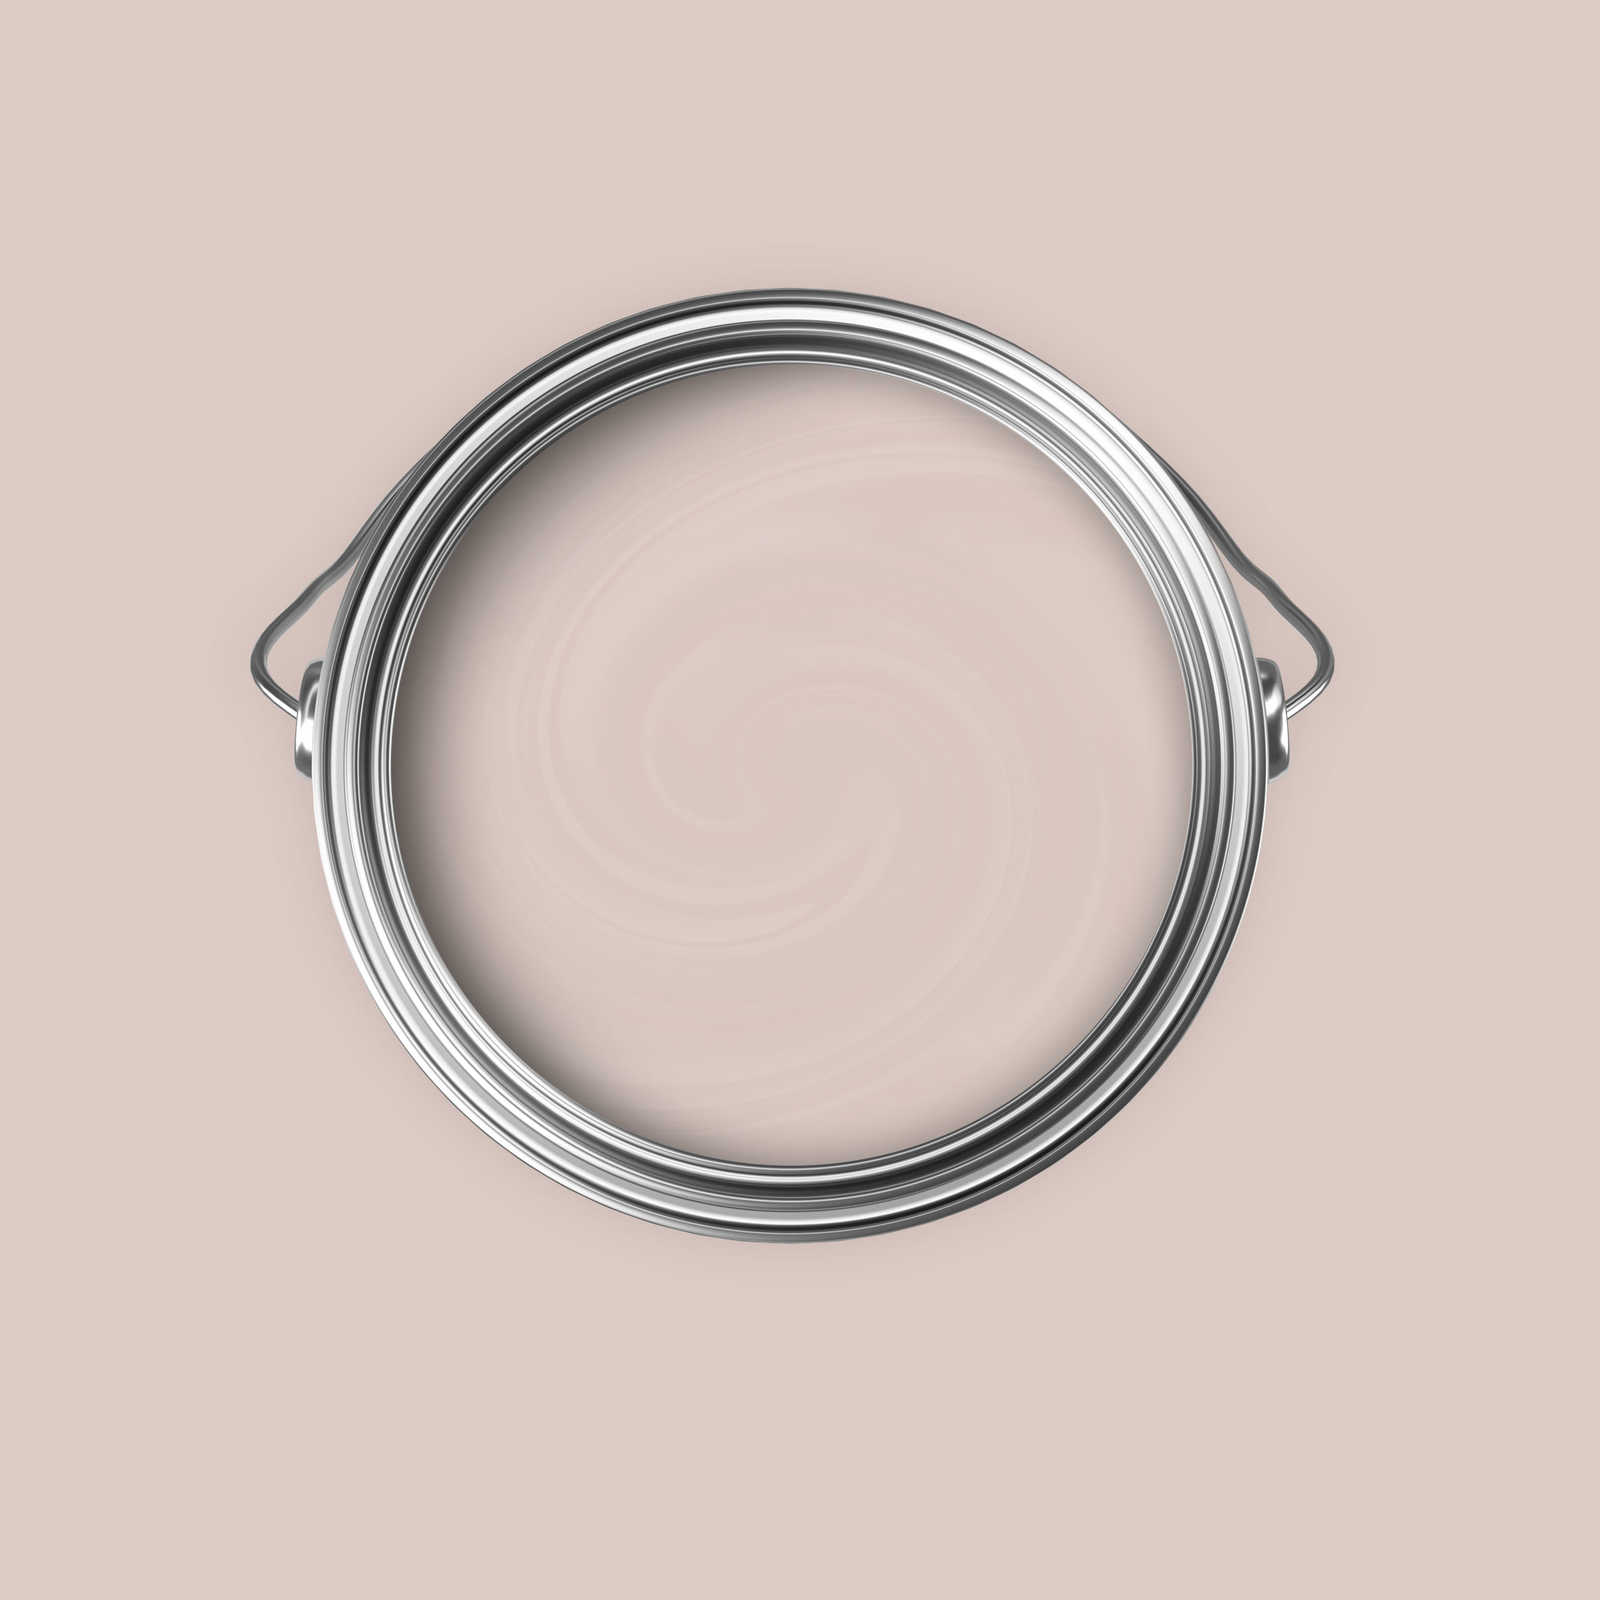             Premium Wall Paint Soothing Old Pink »Natural Nude« NW1008 – 5 litre
        